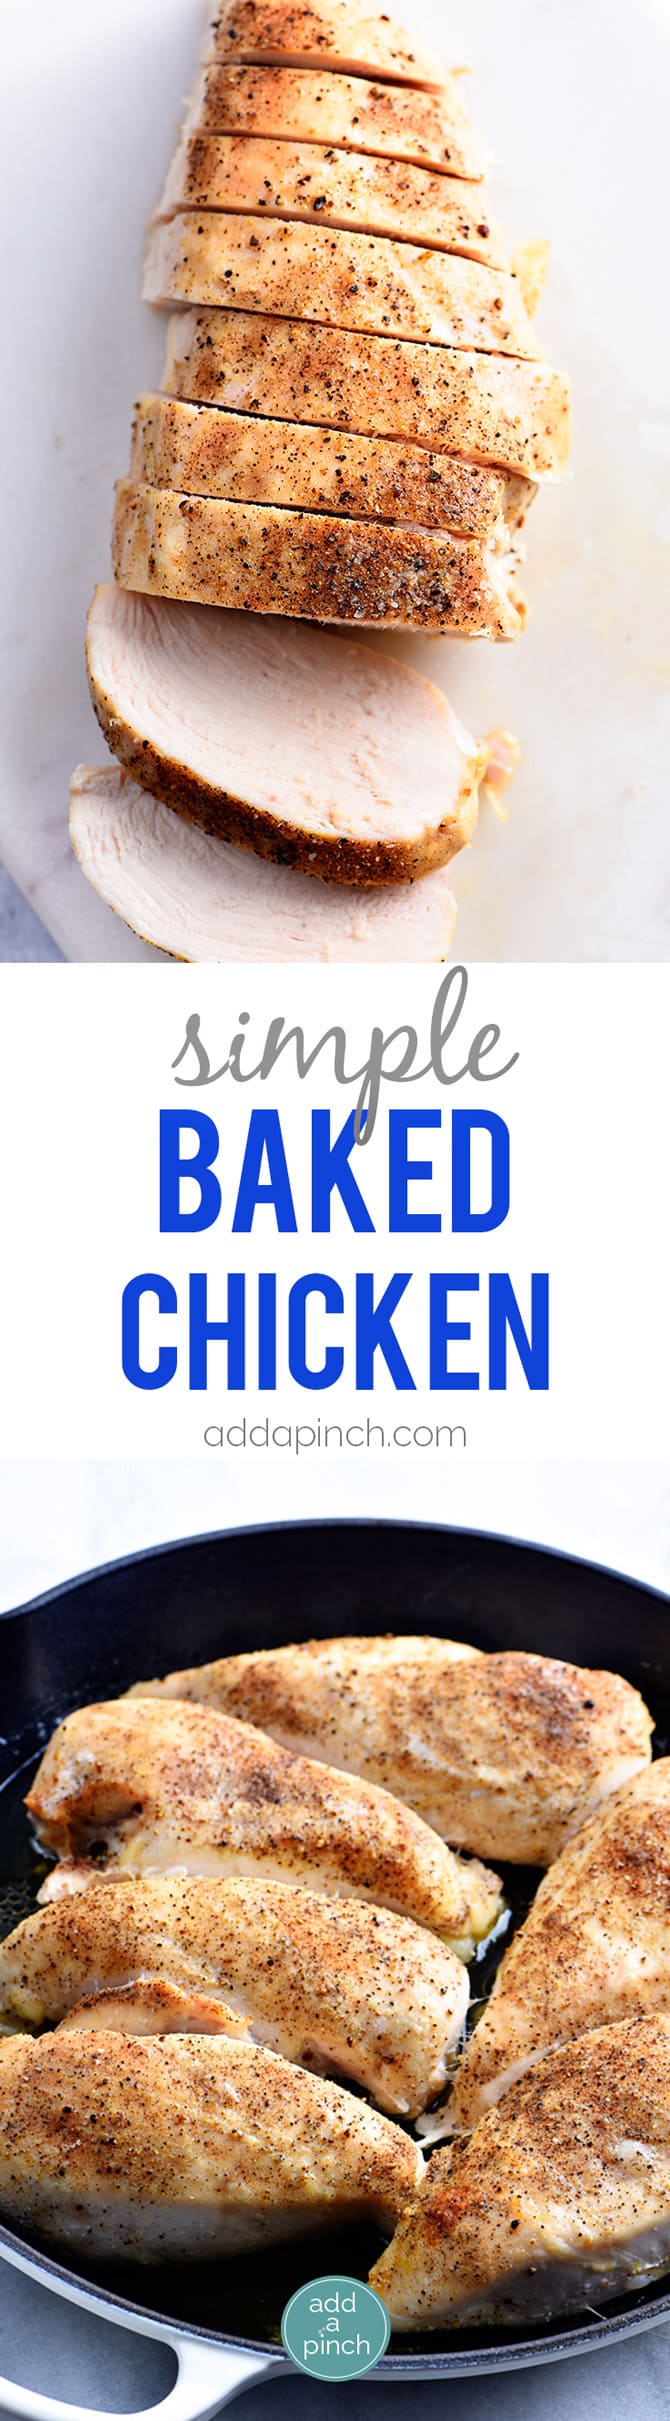 Simple Baked Chicken Breast Recipe - Learning how to make baked chicken breast just got simple with this foolproof recipe. Ready and on the table in less than 30 minutes, but perfect to make-ahead for busy weeknights, too! // addapinch.com